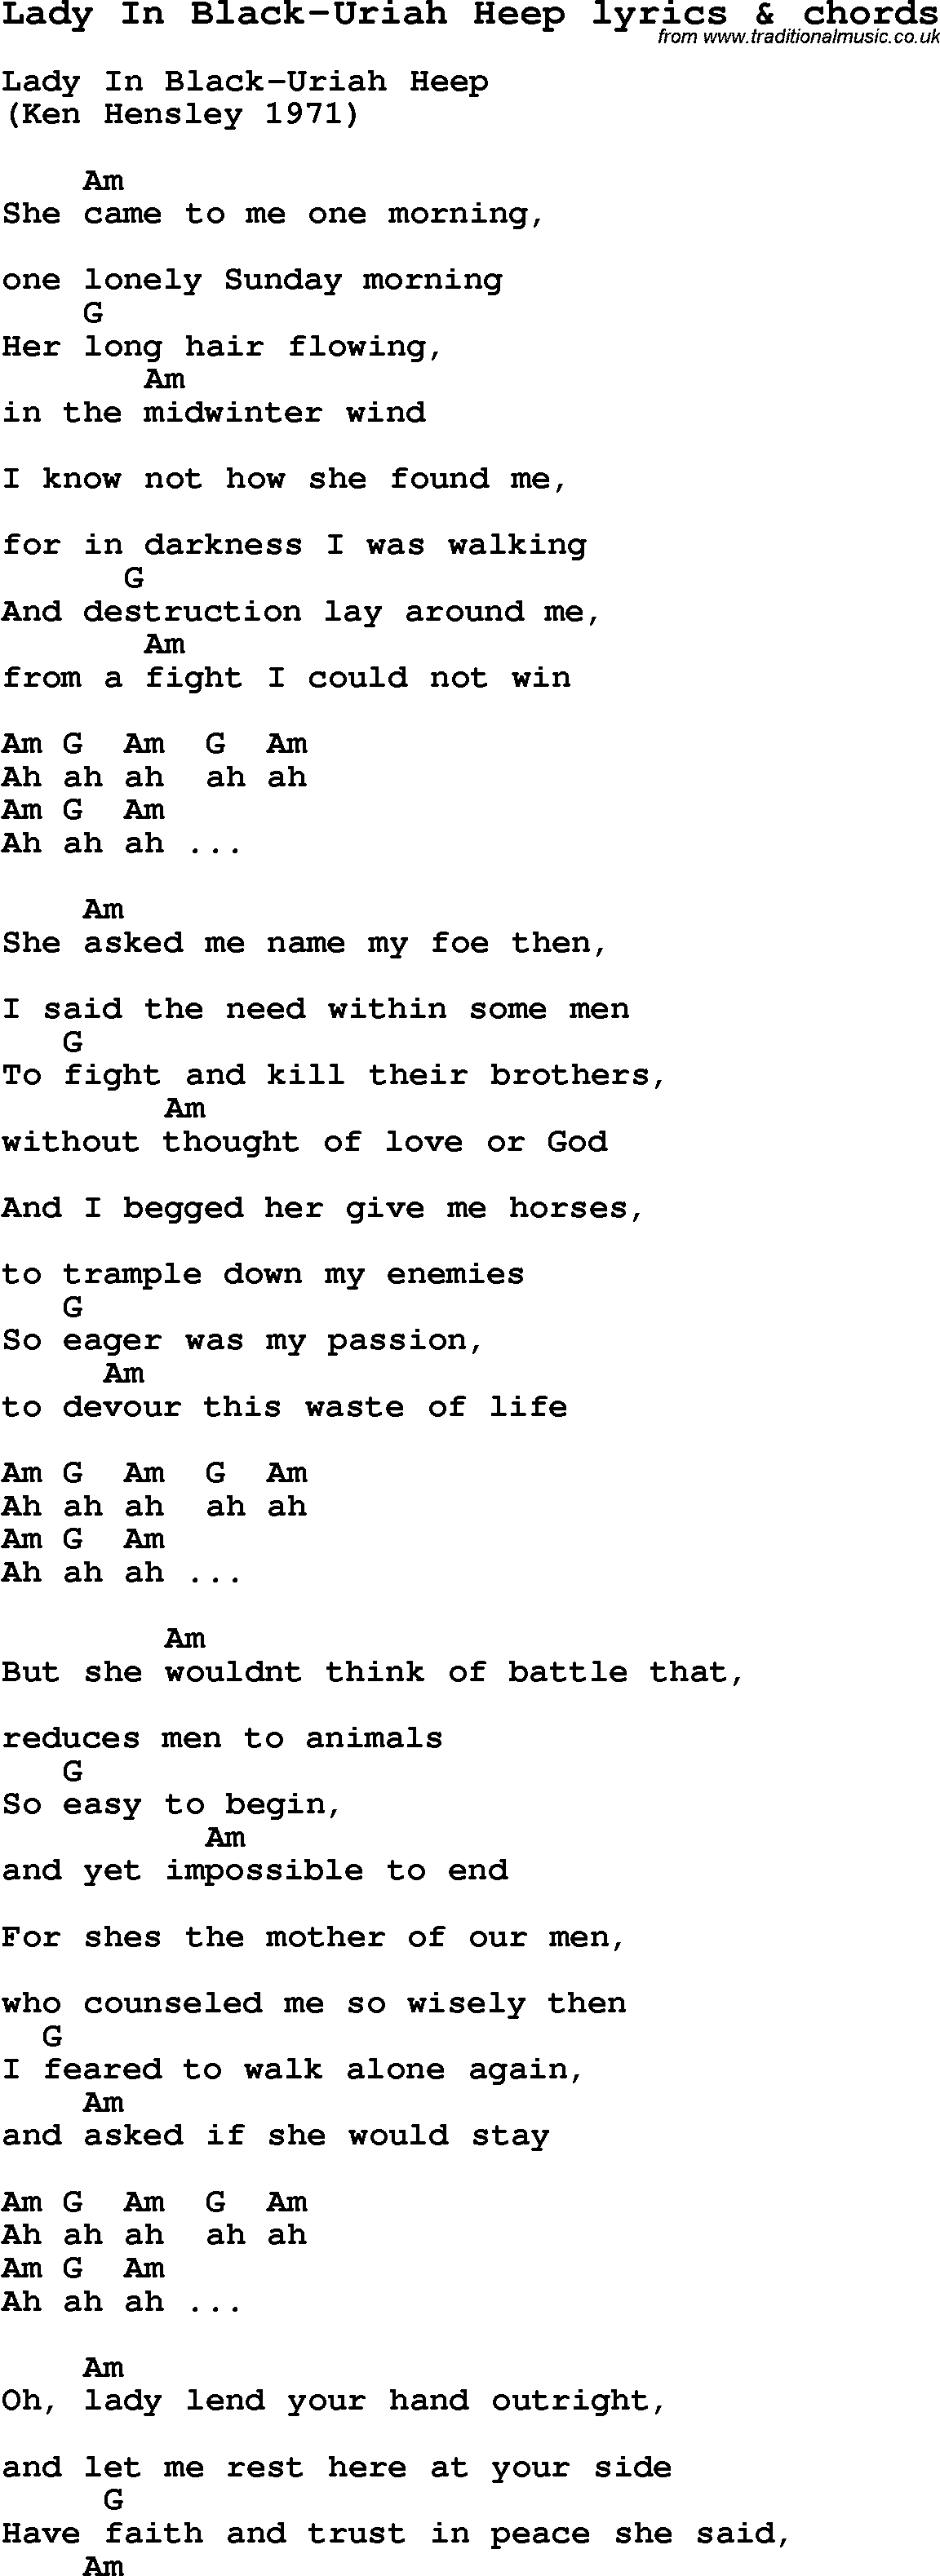 Love Song Lyrics for:Lady In Black-Uriah Heep with chords.